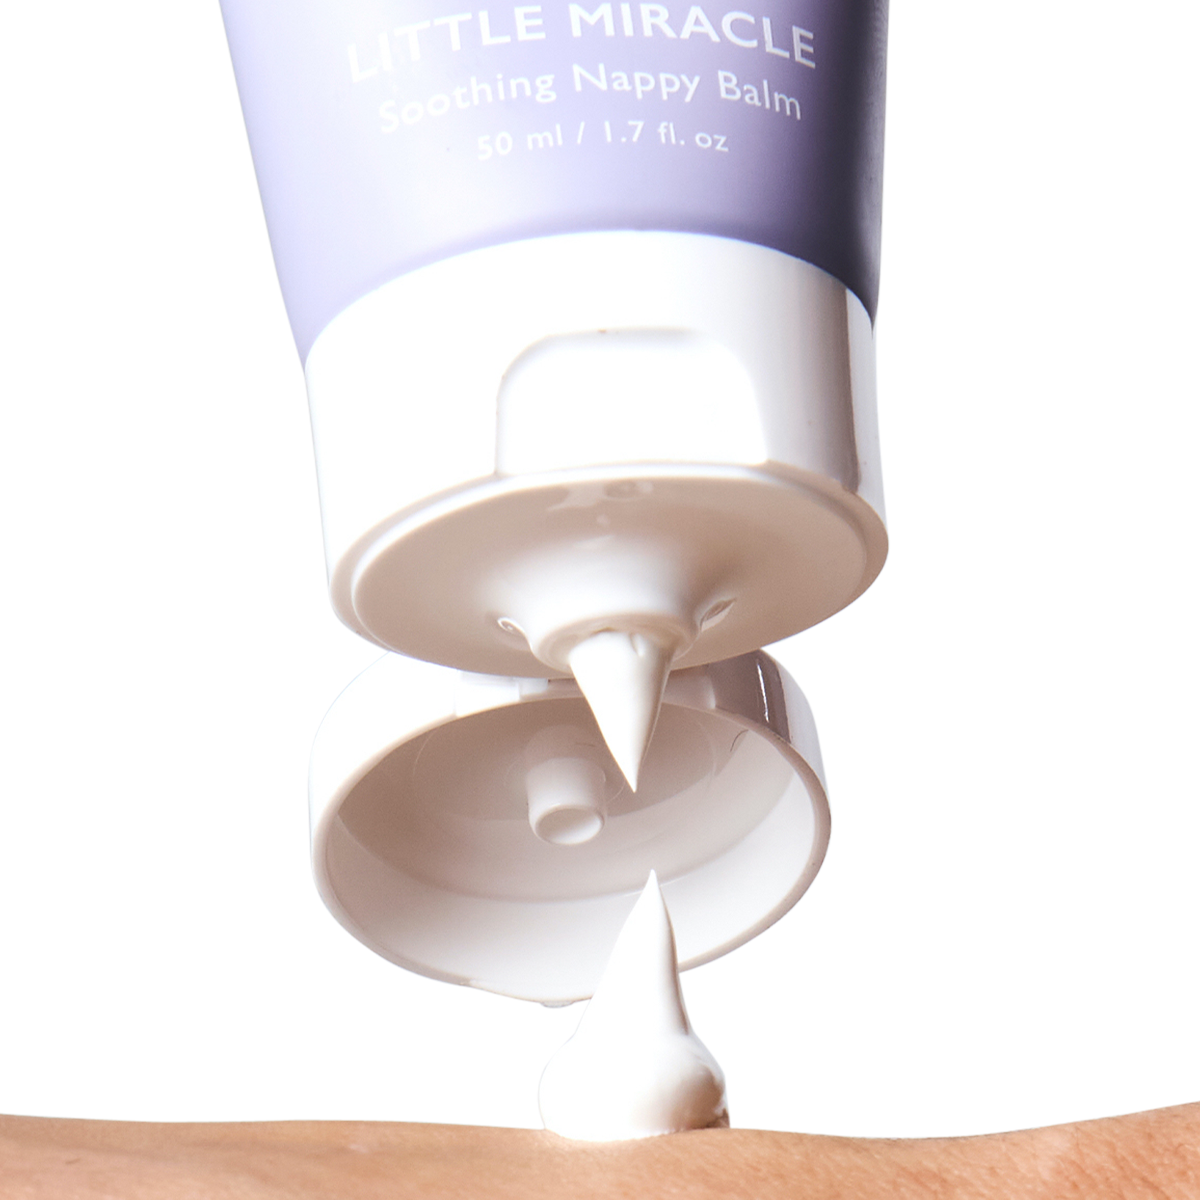 SoKind, Little Miracle- Baby Balm